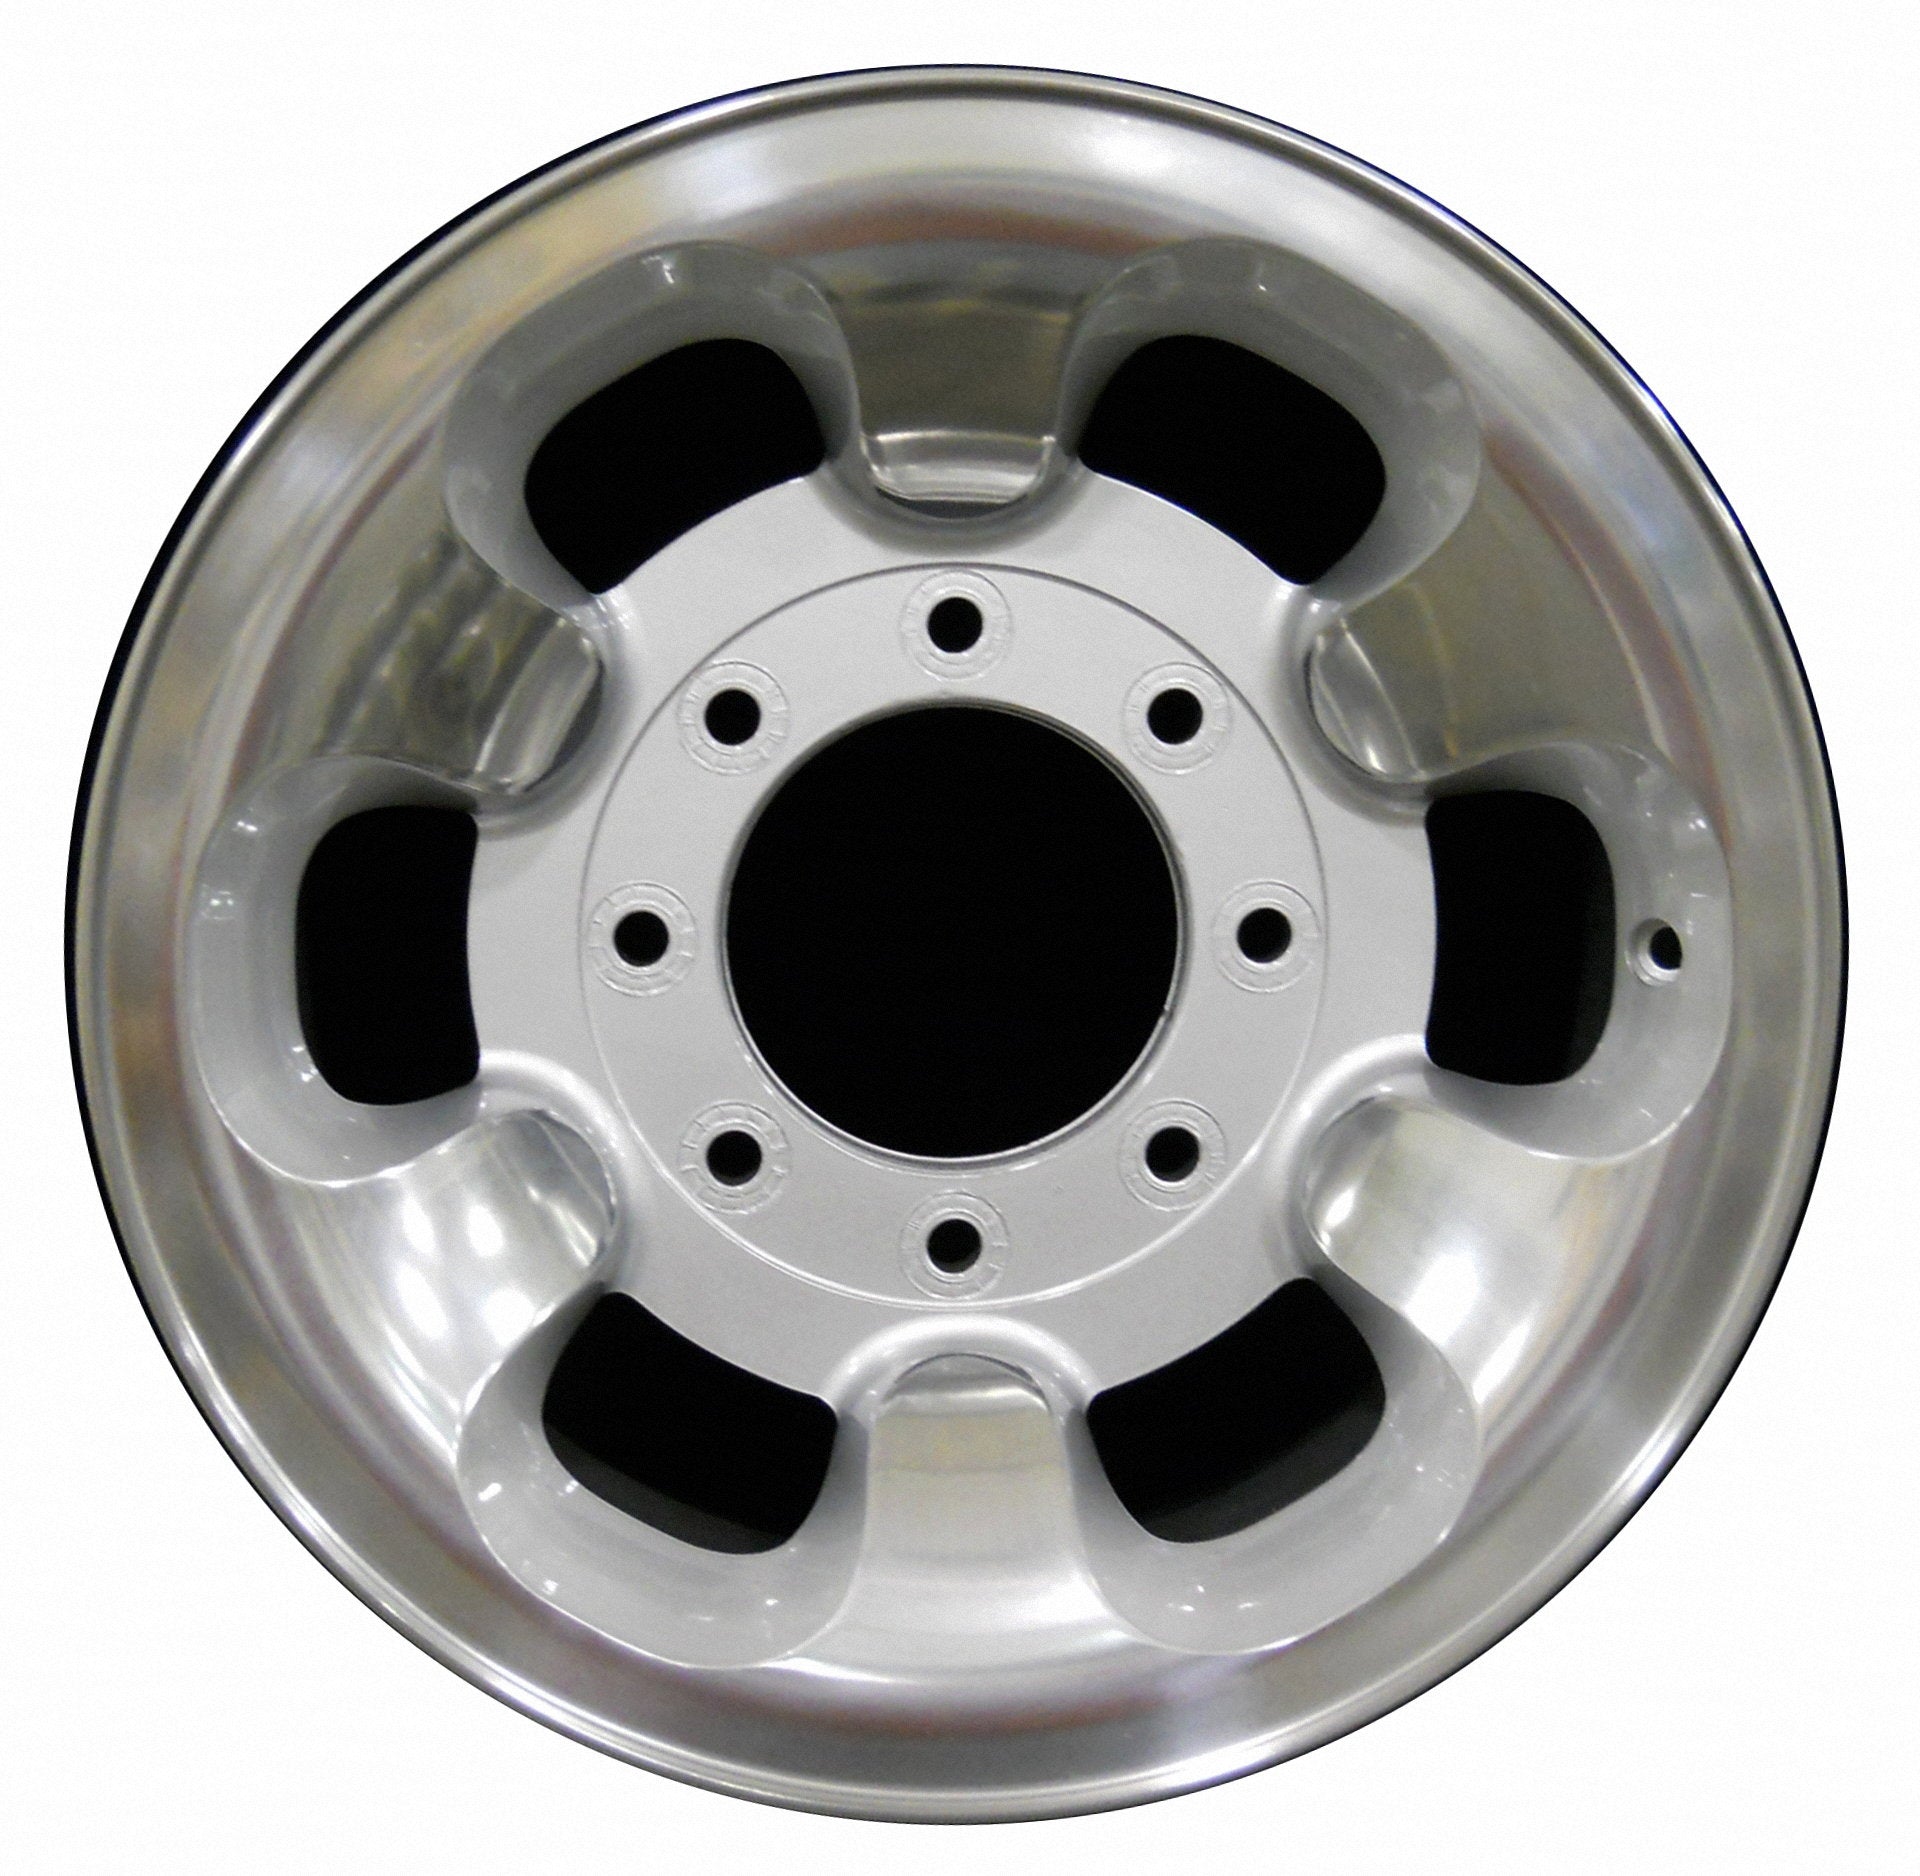 Ford Excursion  2003, 2004, 2005 Factory OEM Car Wheel Size 16x7 Alloy WAO.3407.LS01.POL